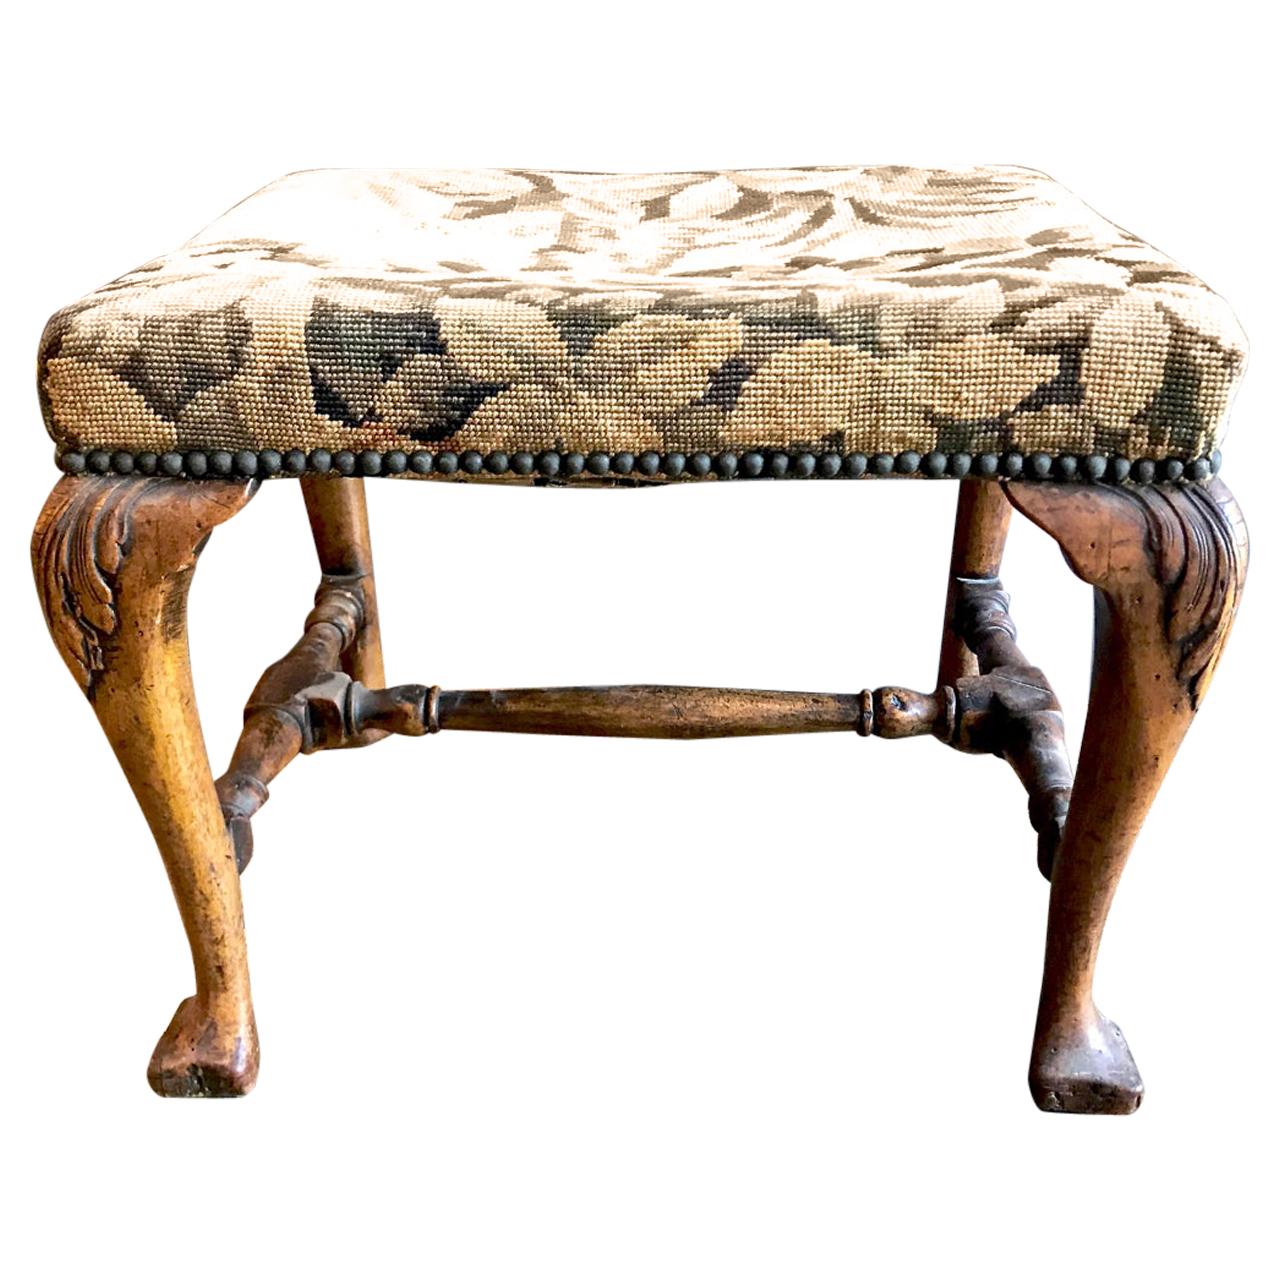 This is a superb example of a George I carved walnut stool that dates to circa 1720. The stool is in very good original condition and is detailed by the original turned stretcher, carved acanthus leaf knees and trifid feet. The Flemish Verdure